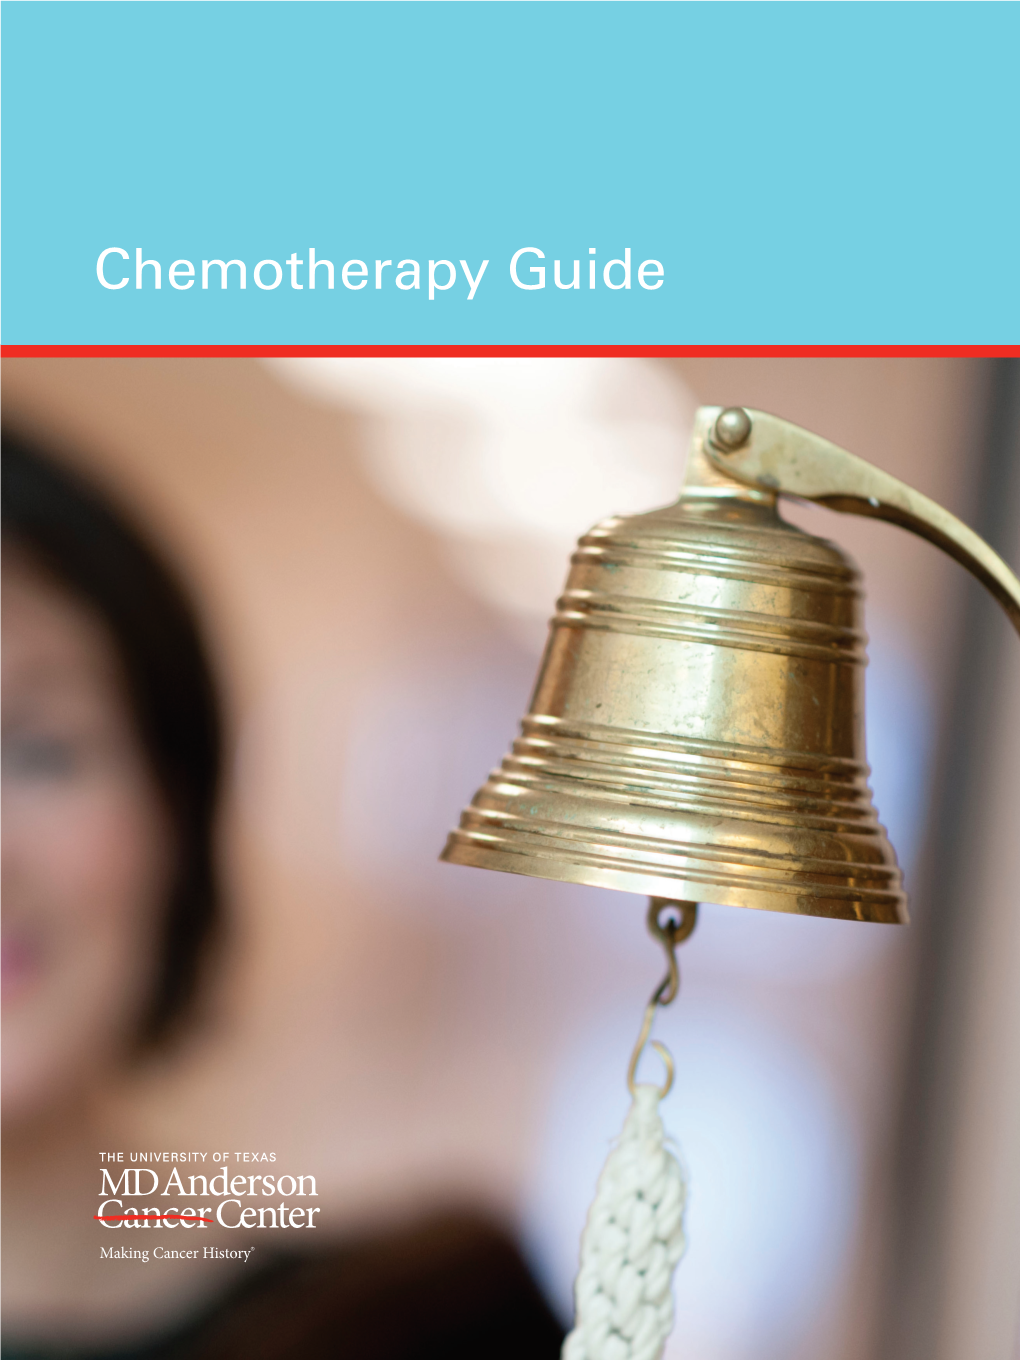 Chemotherapy Guide